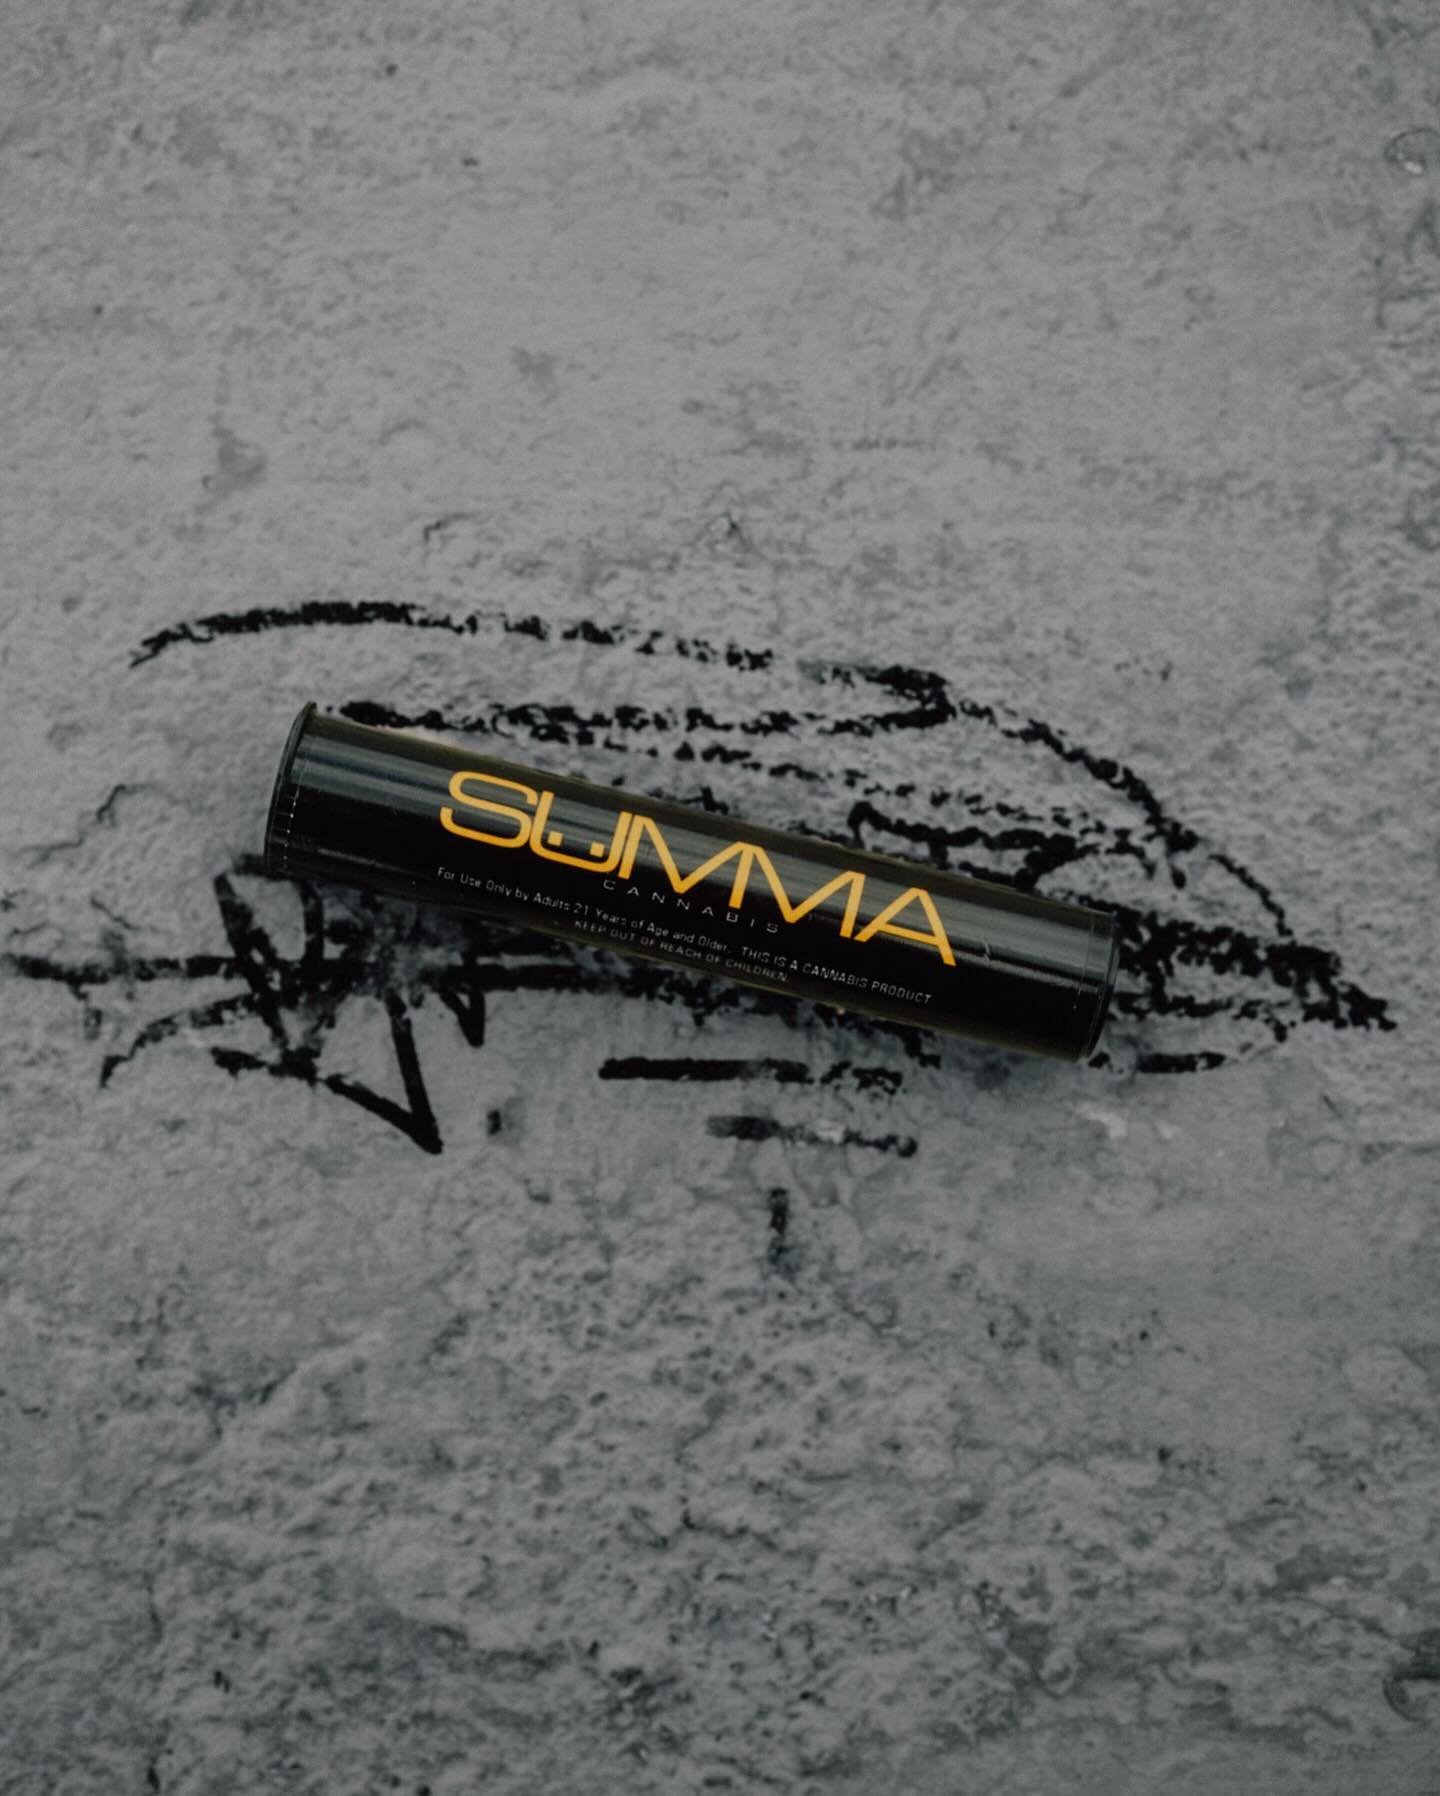 Summa pre rolls is always our morning go to. What strains will you be enjoying ? 🌿⚡️

Keep out of reach of children. For use only by adults 21 years of age or older. Summa Cannabis NV ID: RC072. NFS. 

#chill #instarelax  #quality #lasvegas #nevada 